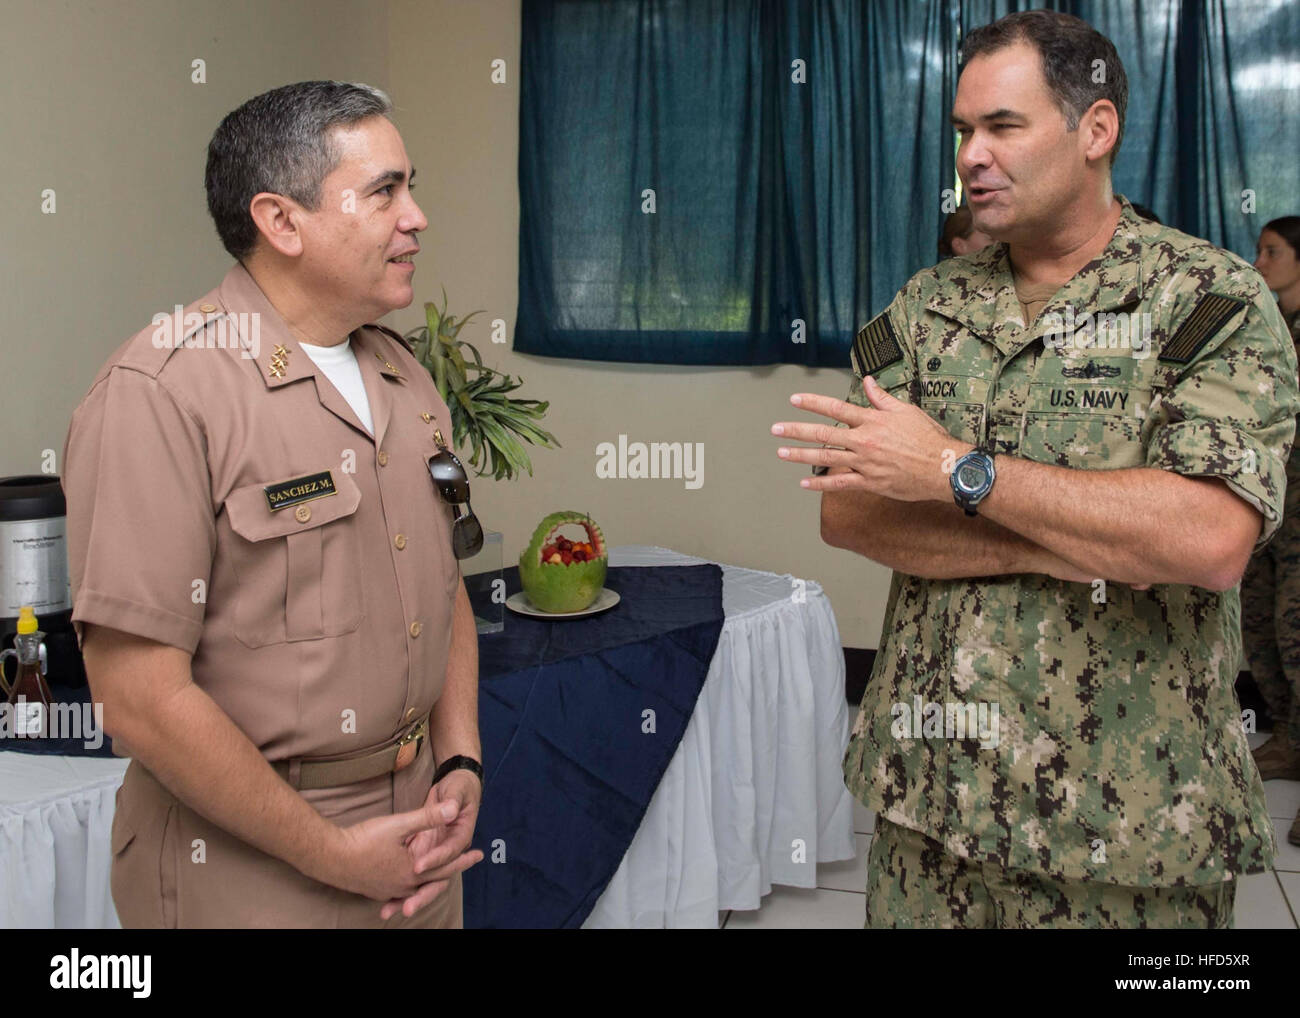 Southern Partnership Station Joint High Speed Vessel 2014 (SPS-JHSV 14) Mission Commander Capt. Sam Hancock, speaks with Guatemalan Capitán de navío Erick A. Sanchez Muniz, prior to a breakfast at the Brigada de Infanteria de Marina during Southern Partnership Station 2014. Southern Partnership Station 2014 is a U.S. Navy deployment focused on subject matter expert exchanges with partner nation militaries and security forces. U.S. Naval Forces Southern Command and U.S. 4th Fleet employ maritime forces in cooperative maritime security operations in order to maintain access, enhance interoperabi Stock Photo